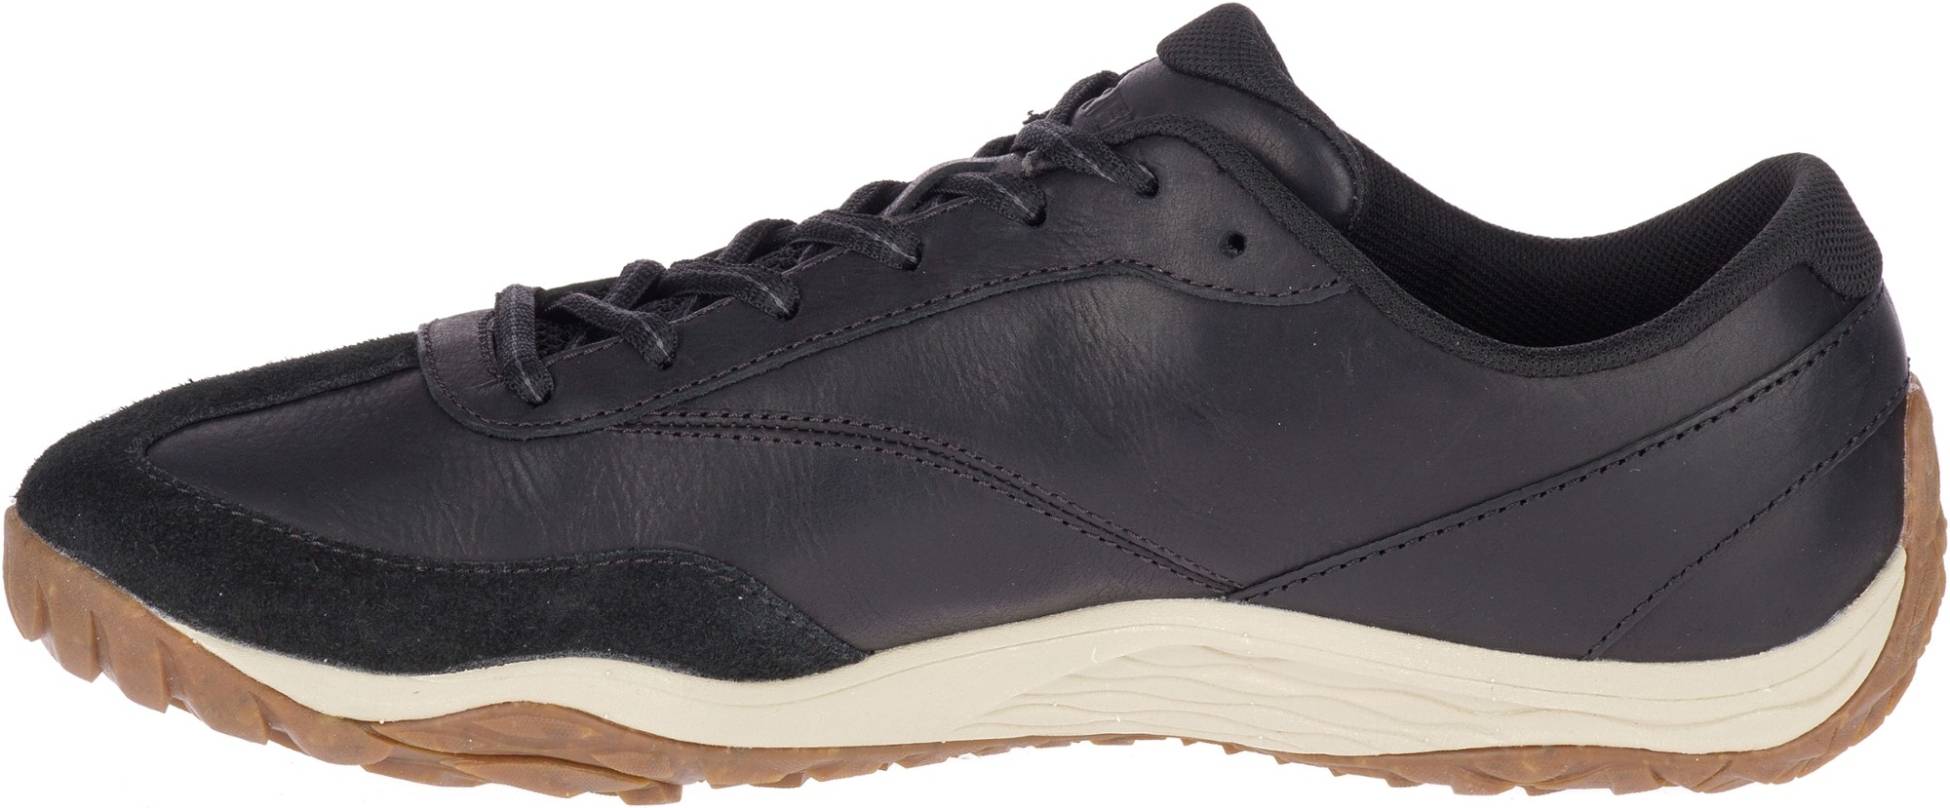 Leather running shoes: Save up to 49 